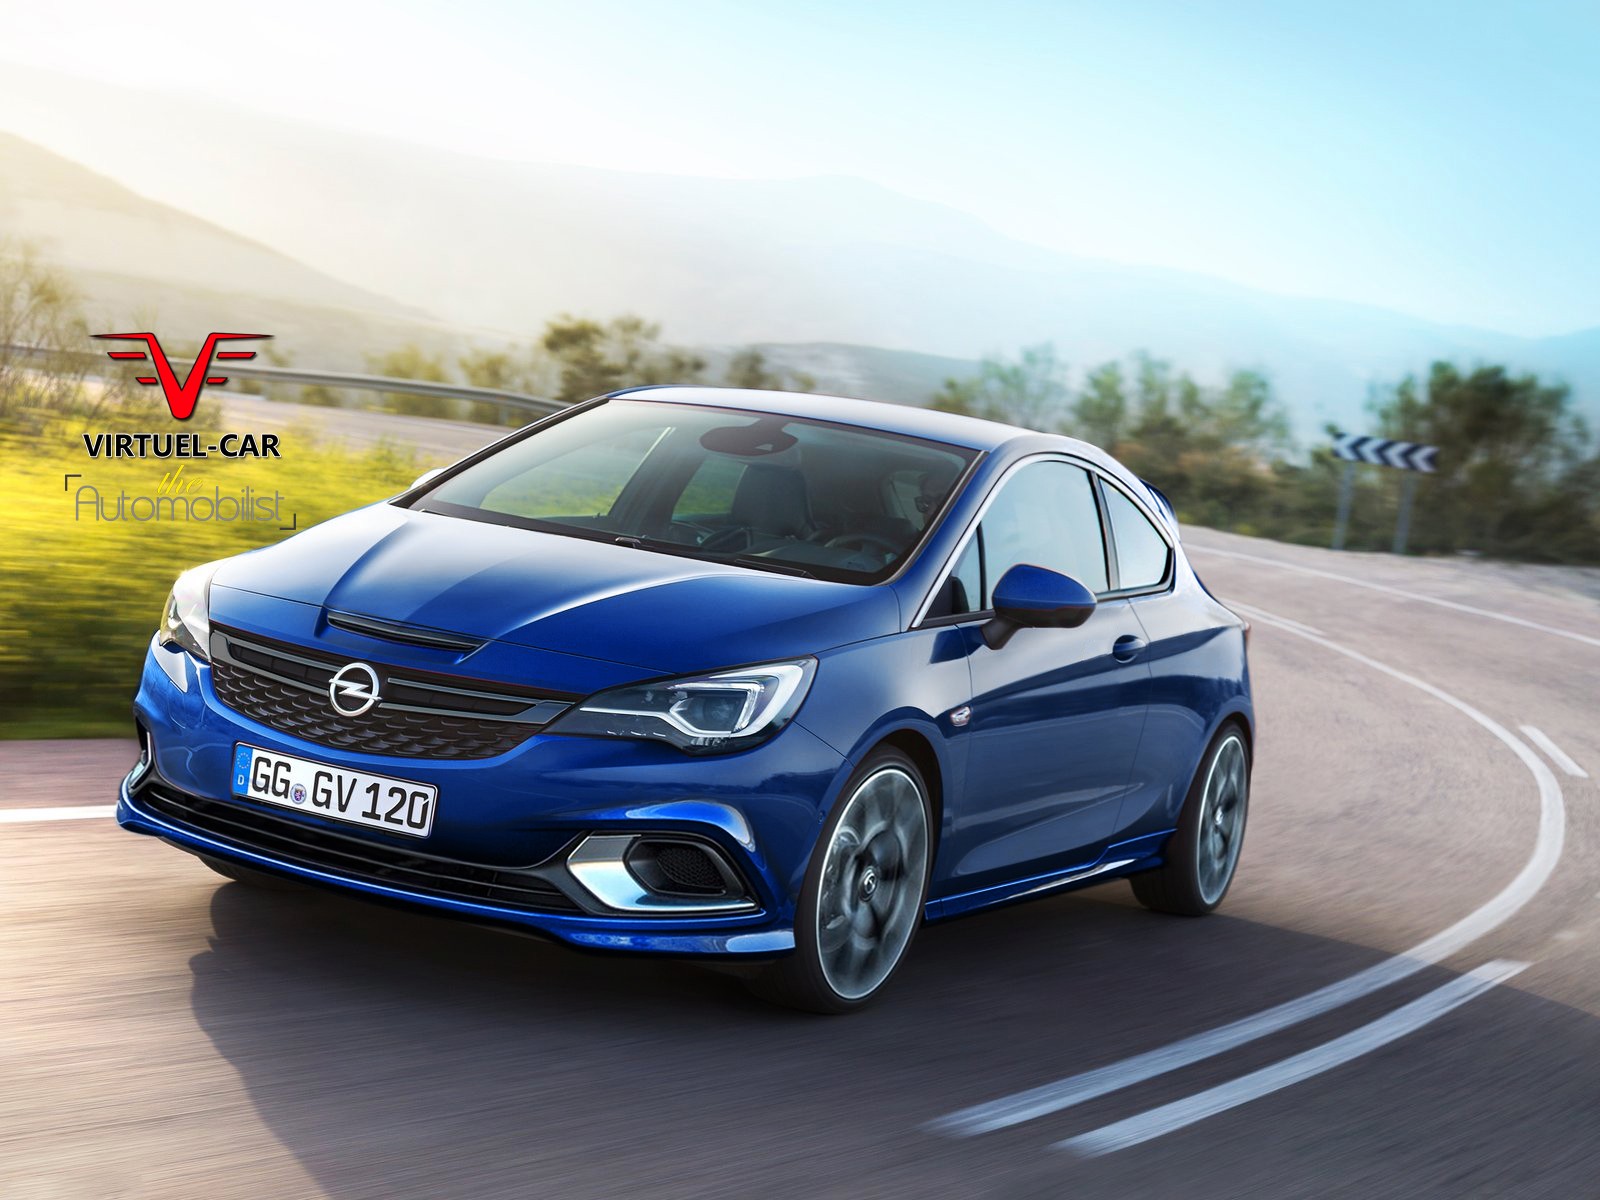 2017 Opel Astra Opc Rendered Could Use Tuned 1 6 Liter